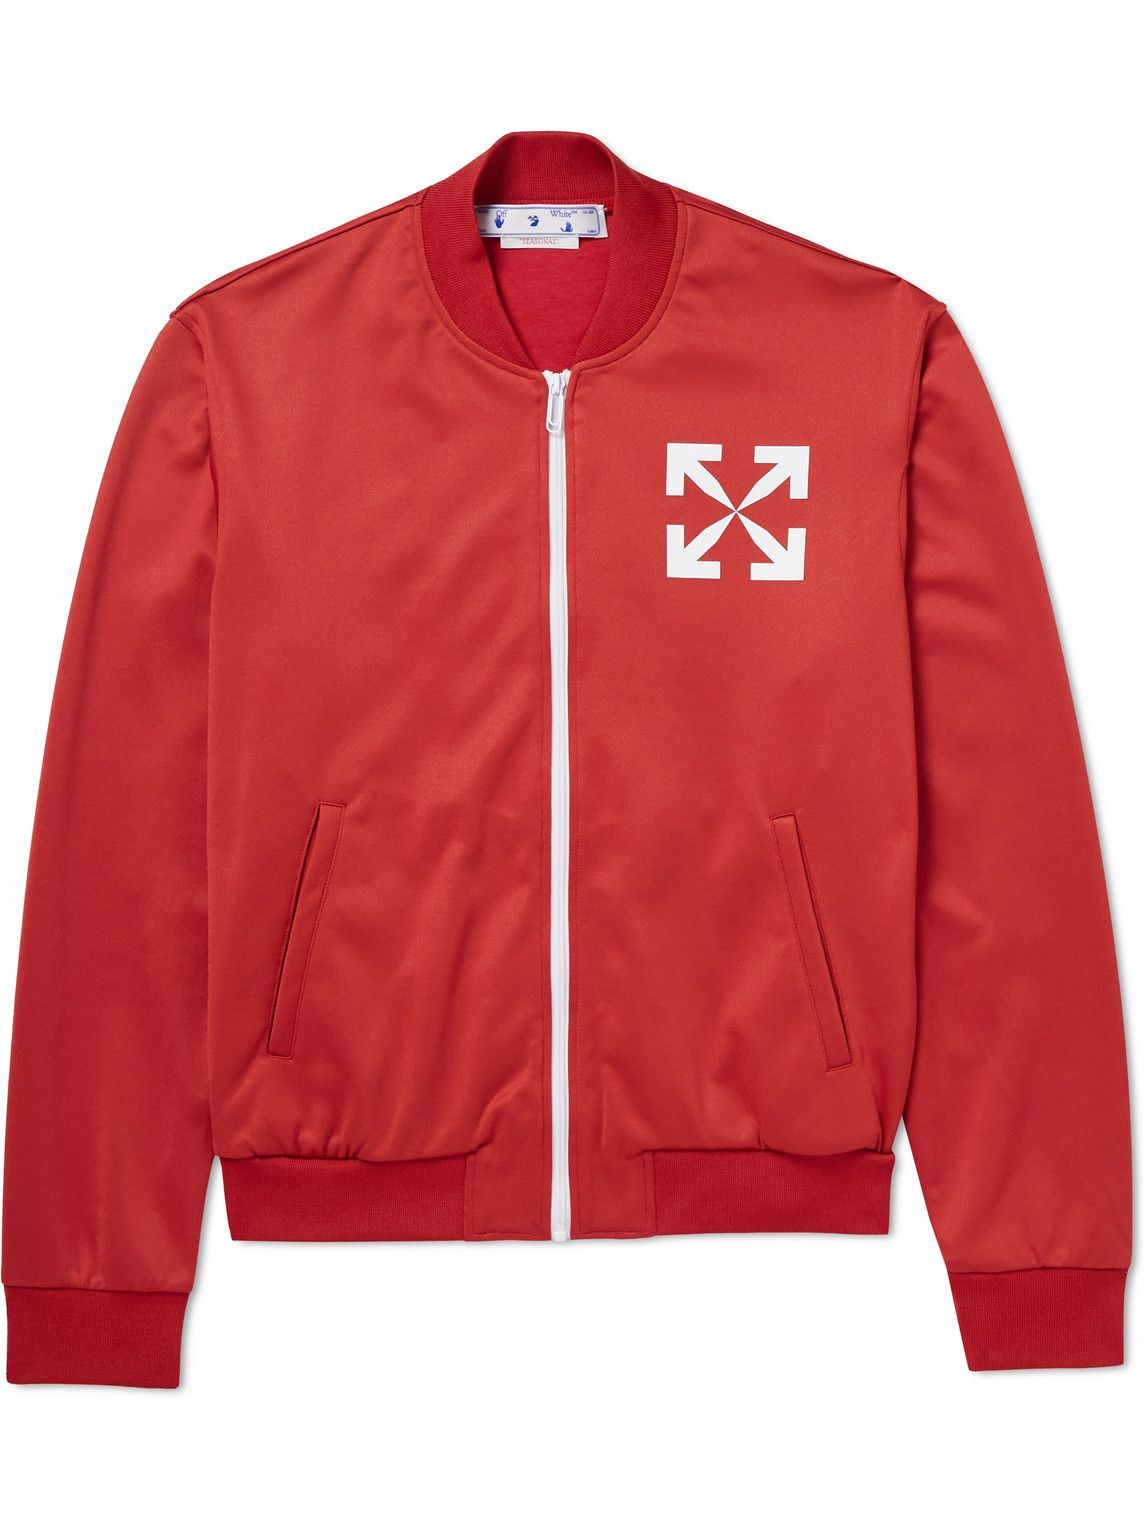 Off-White - Logo-Flocked Jersey Track Jacket - Red Off-White